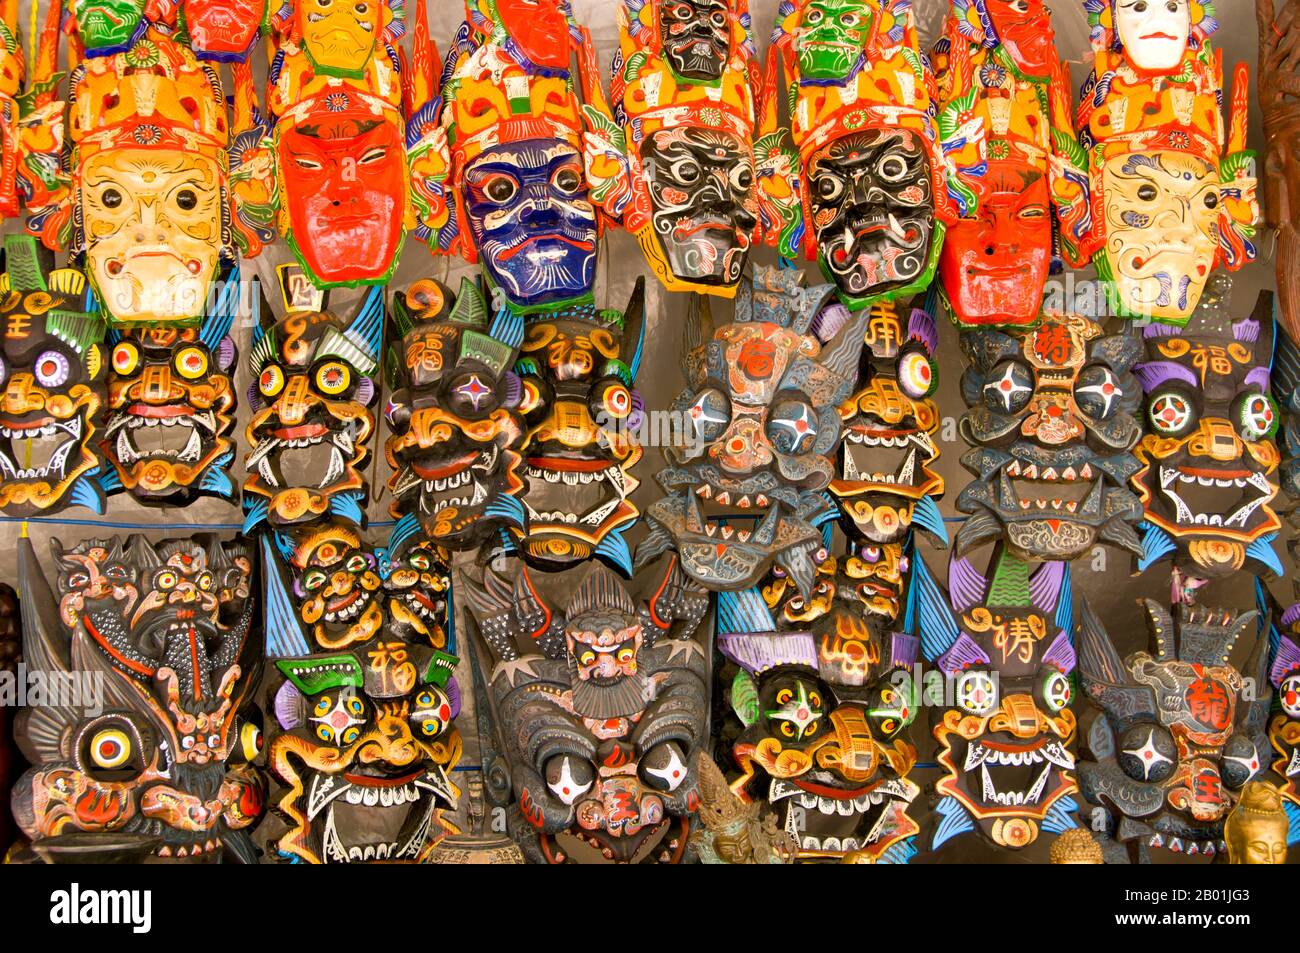 China: Various masks and statuary in the market next to the Li River, Yangshuo, near Guilin, Guangxi Province.  Yangshuo is rightly famous for its dramatic scenery. It lies on the west bank of the Li River (Lijiang) and is just 60 kilometres downstream from Guilin. Over recent years it has become a popular destination with tourists whilst also retaining its small river town feel.  Guilin is the scene of China’s most famous landscapes, inspiring thousands of paintings over many centuries. They are often called the ‘finest mountains and rivers under heaven’. Stock Photo